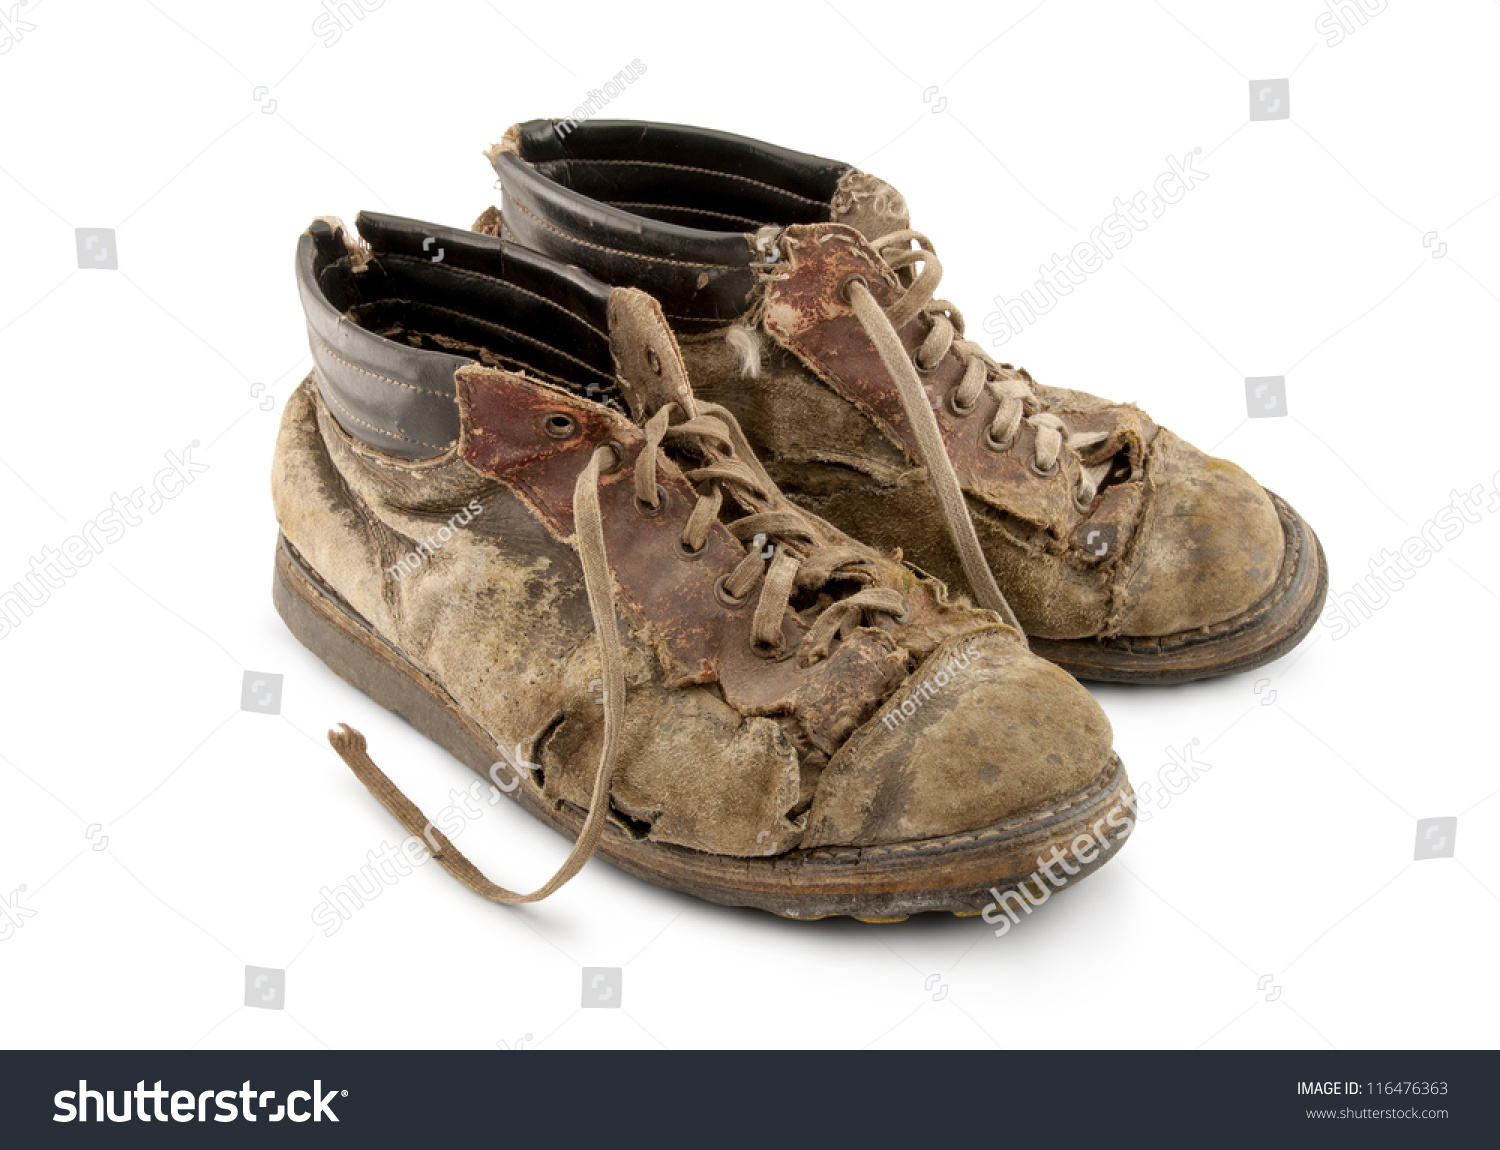 Old Shoes On White Background Stock Photo 116476363 - Shutterstock